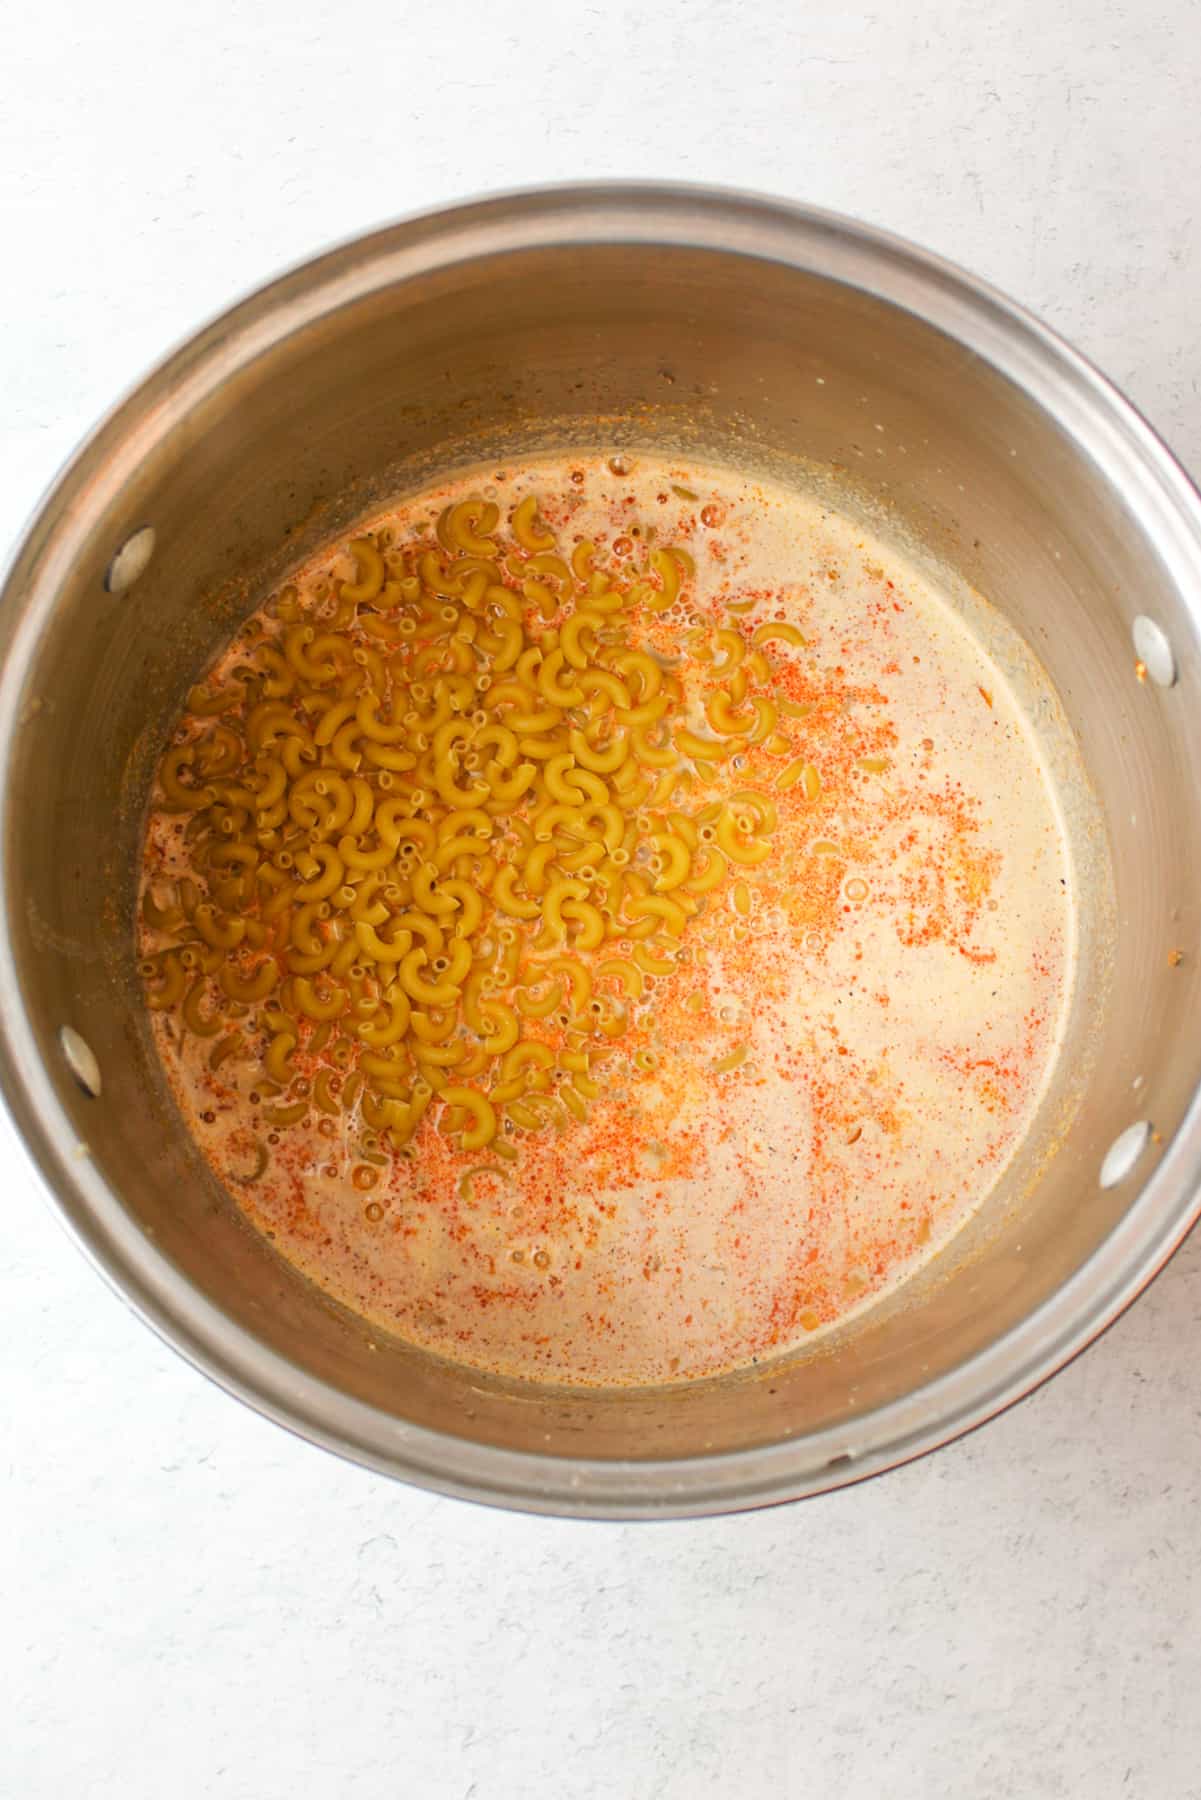 dry elbow noodles added to a large pot of orange liquid.